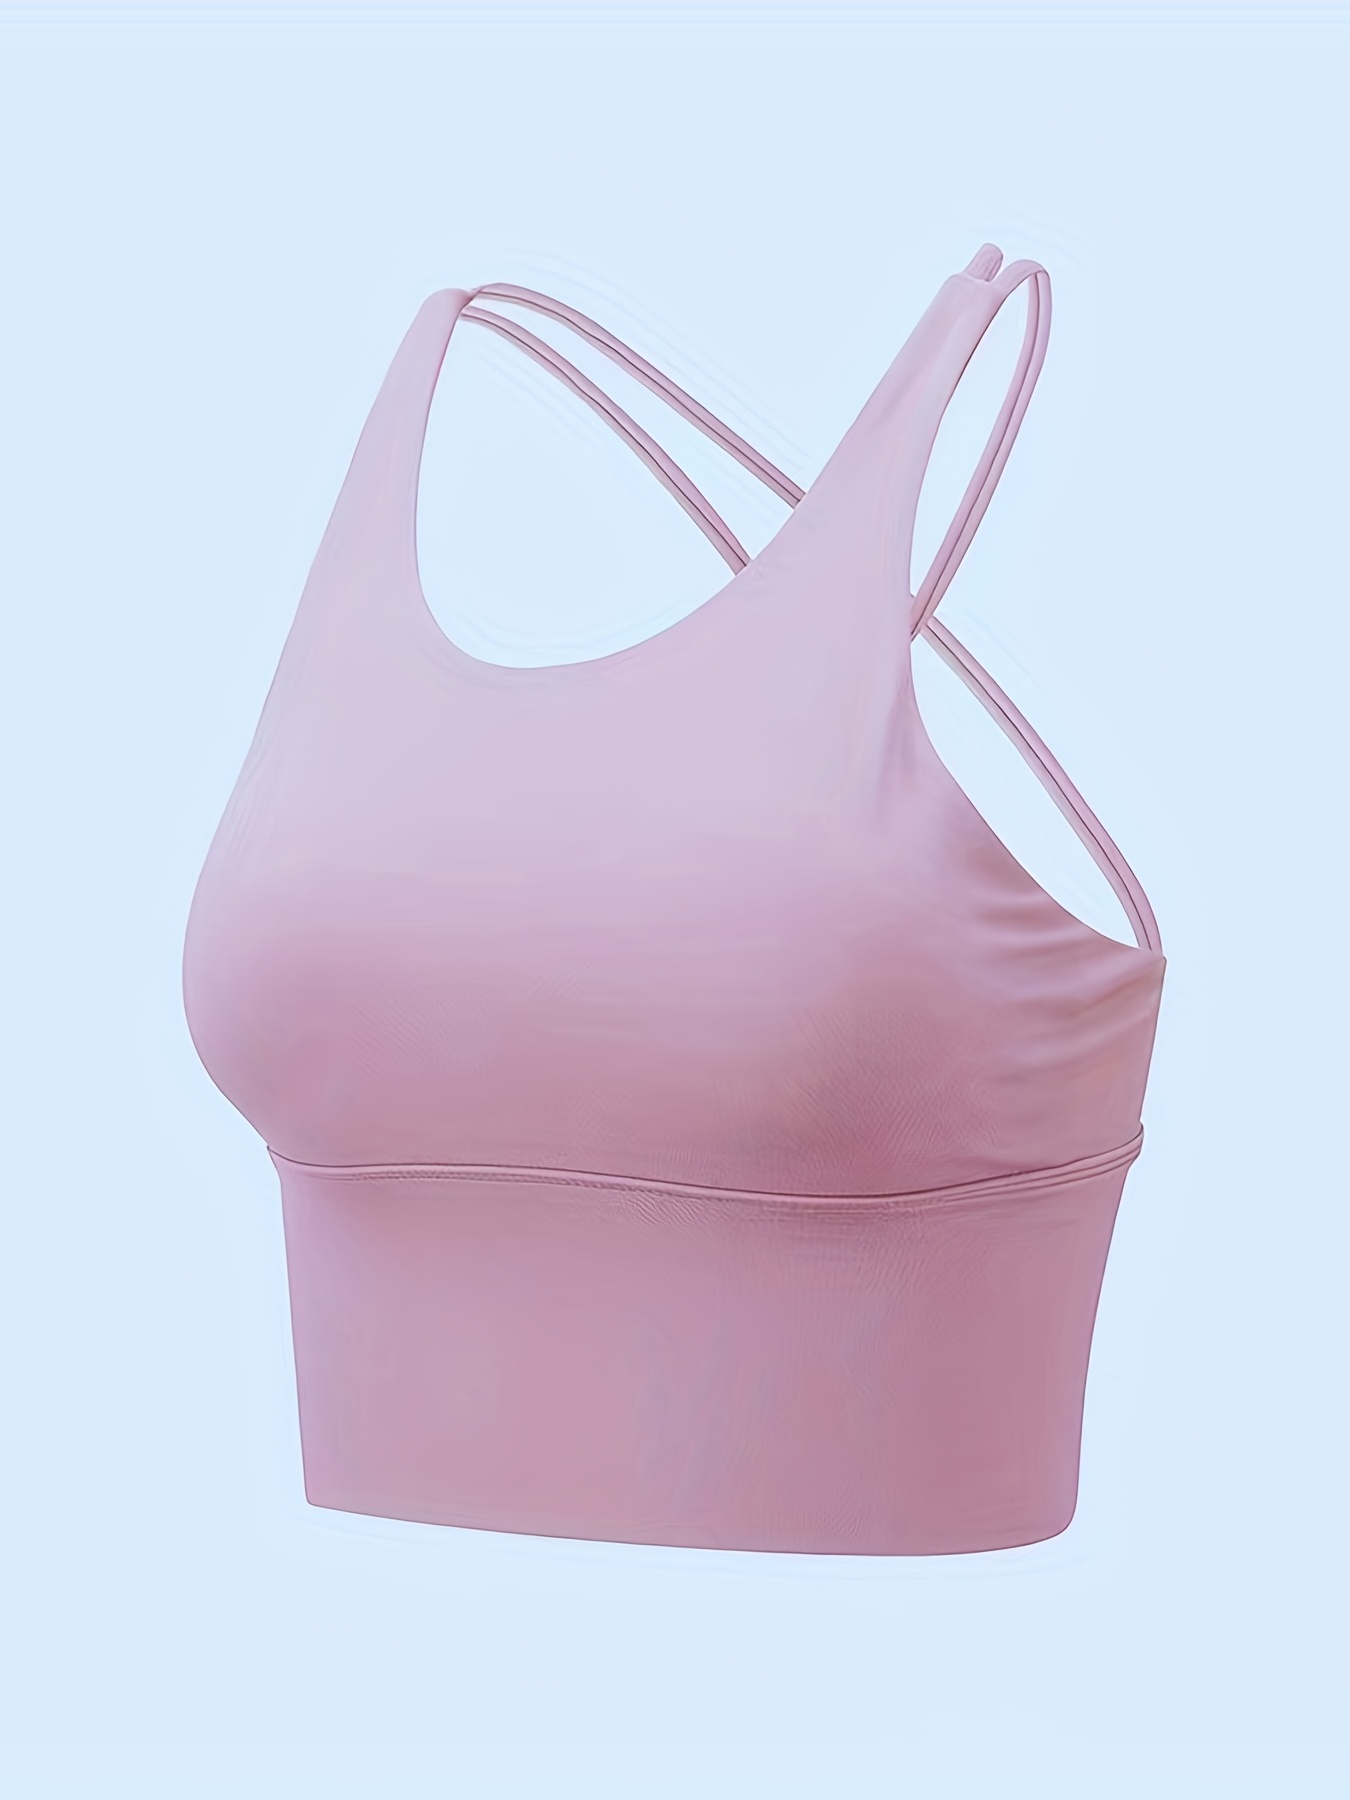 RQYYD Plus Size Sports Bras with Zipper Front Medium High Impact Support  Strappy Criss Cross Back Workout Bra Tops Pink XL